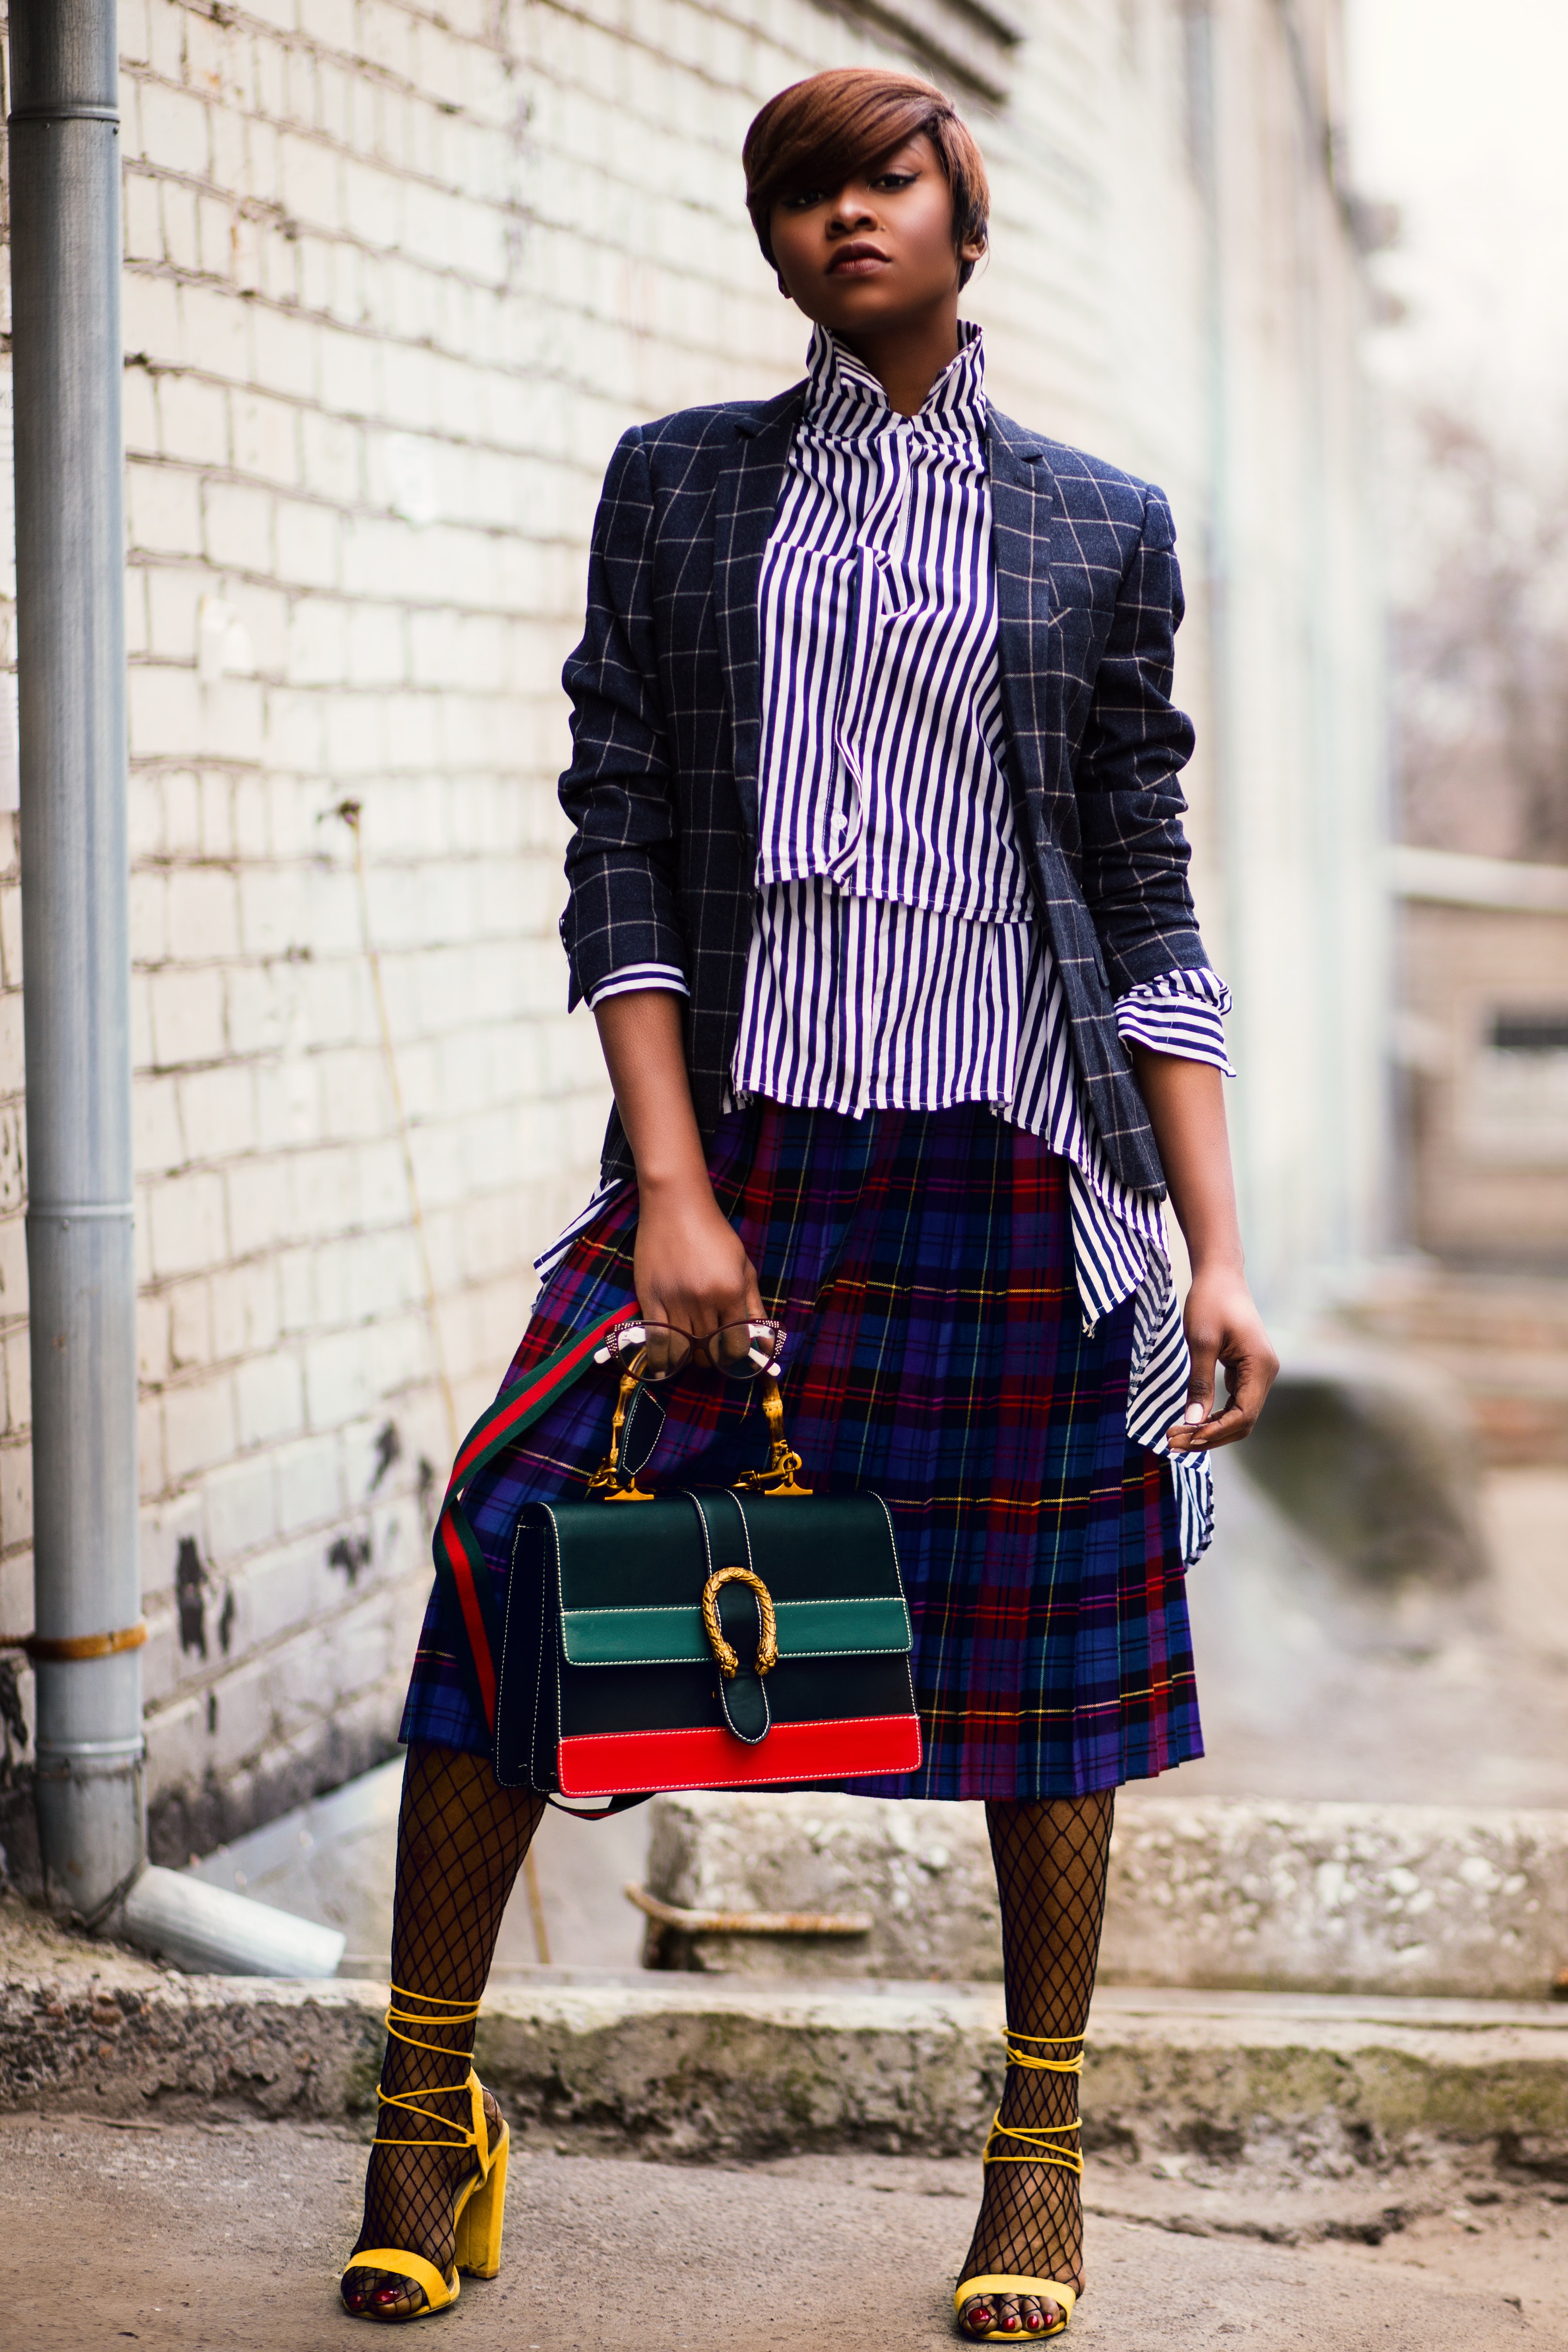 Woman in Blue and White Plaid Cardigan Holding Green and Red Handbag, Bag, Outfit, Yellow, Woman, HQ Photo